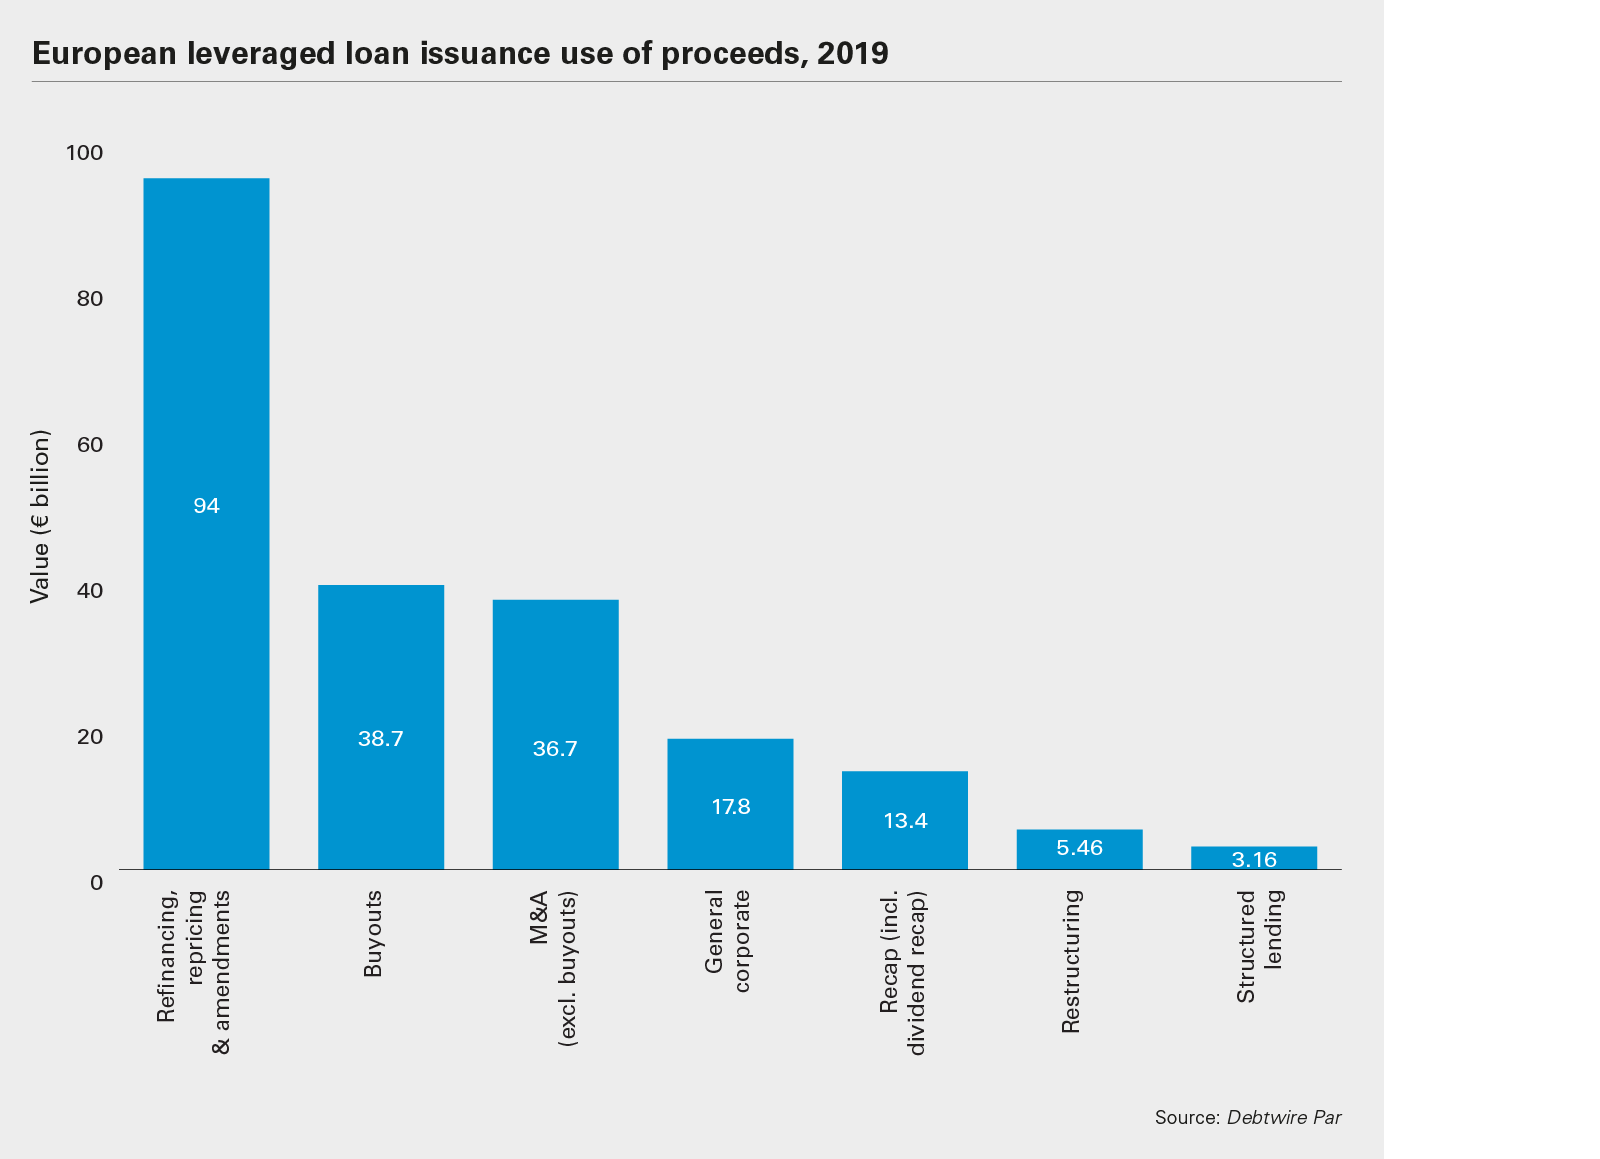 European leveraged loan issuance use of proceeds, 2019 chart